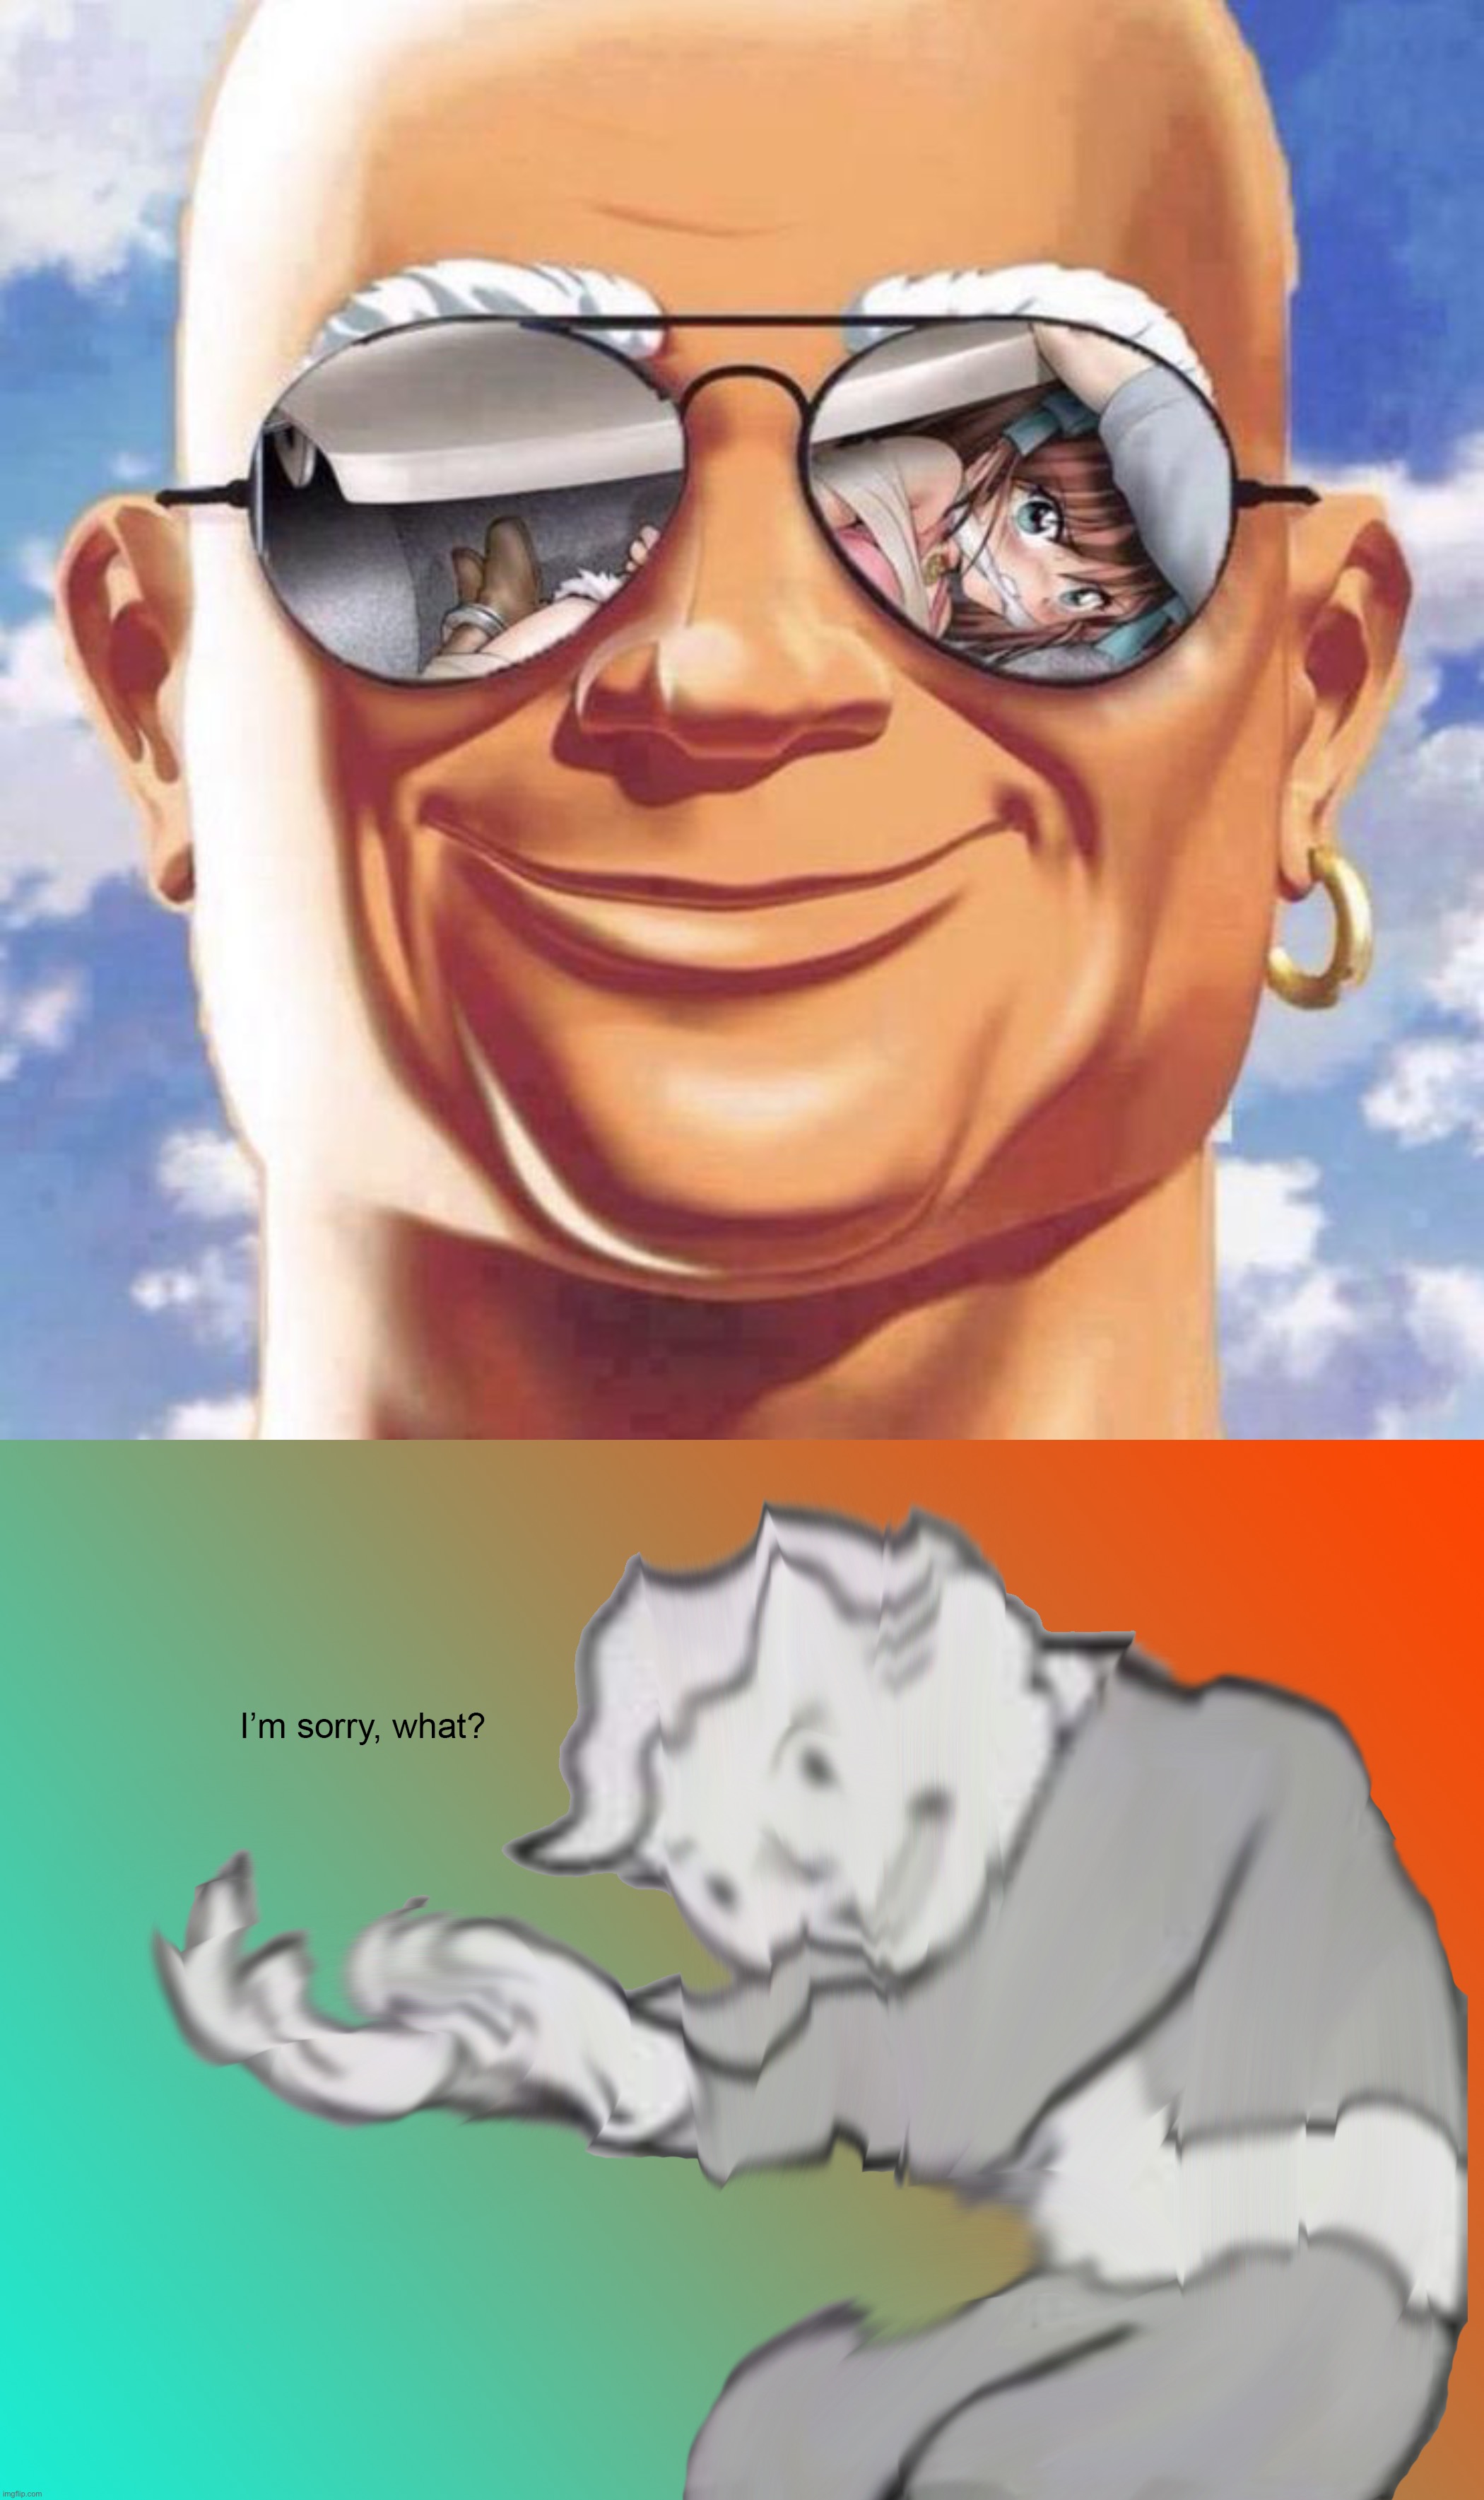 Mr. Clean like anime girls | image tagged in i'm sorry what,memes,funny,cursed image | made w/ Imgflip meme maker